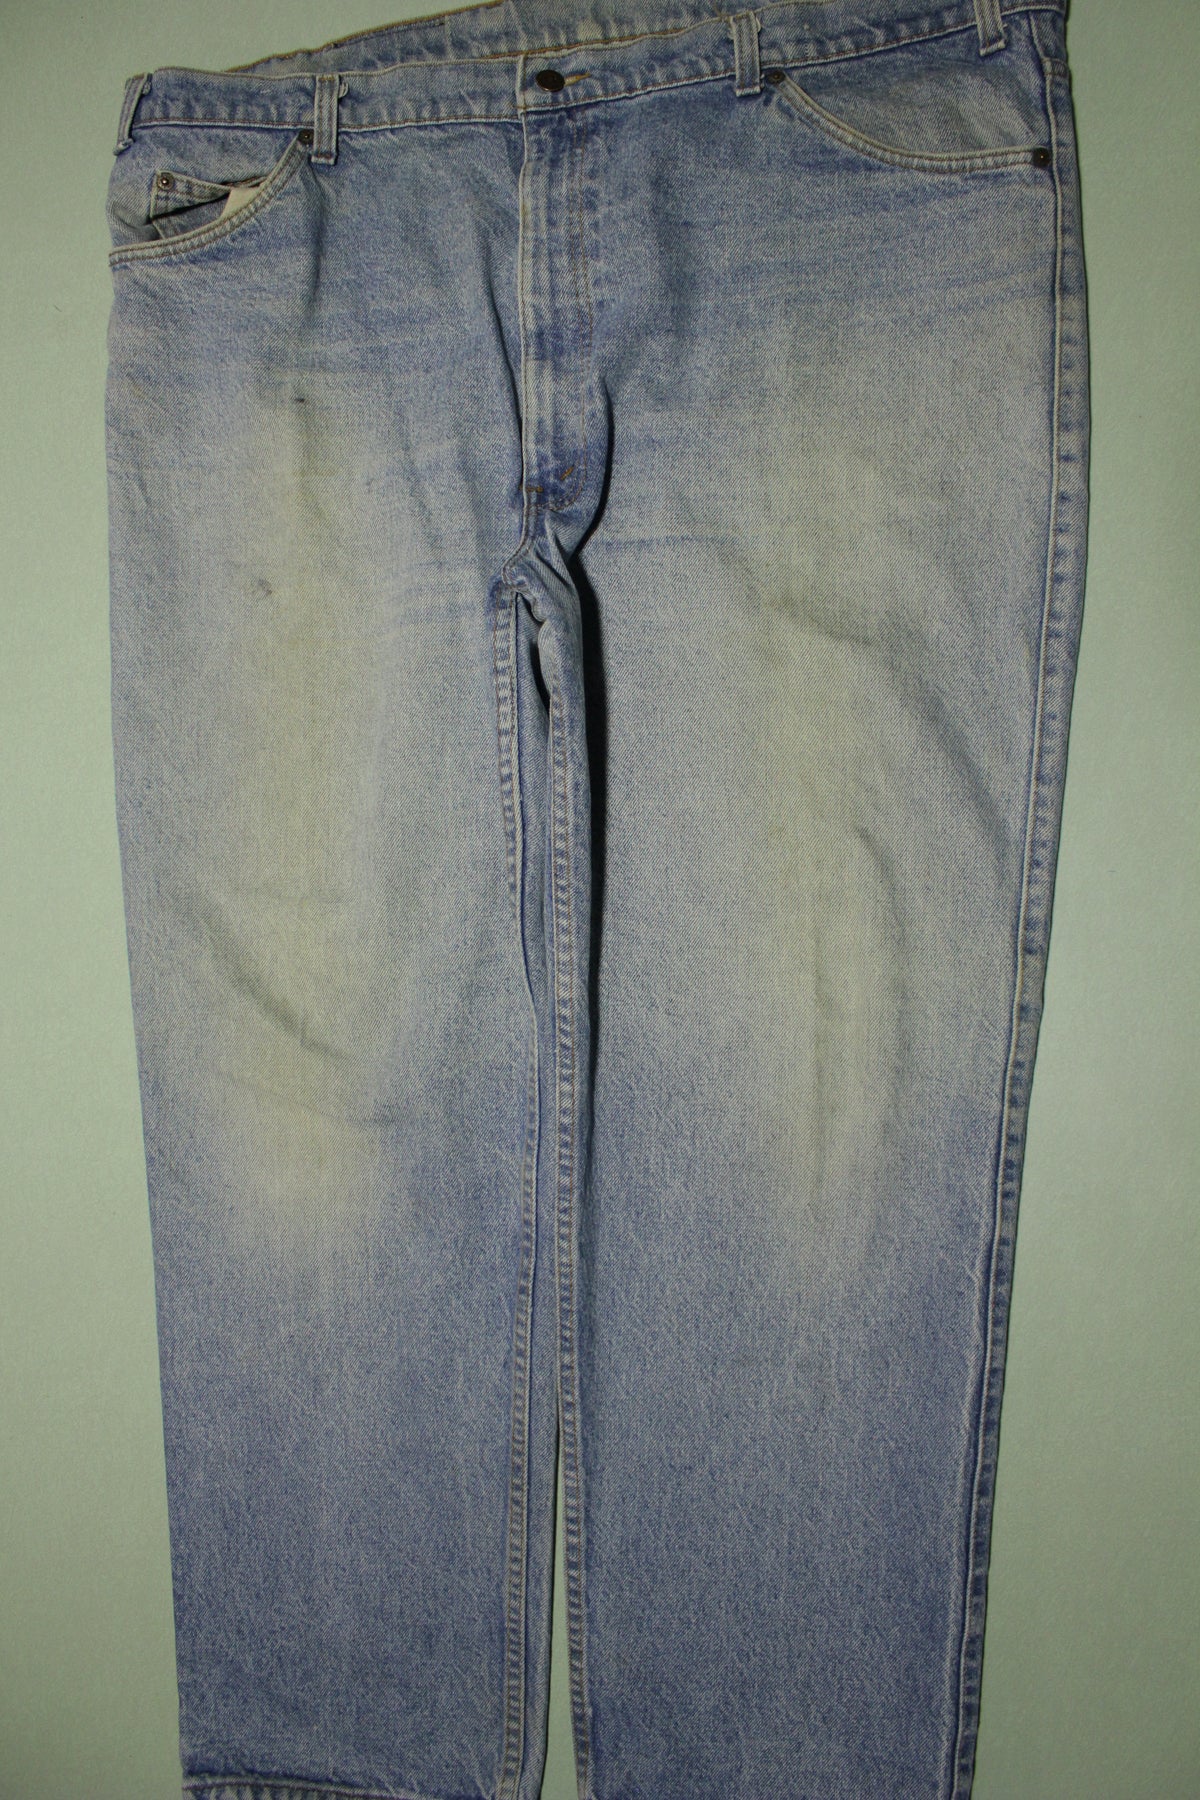 Levis Leather Tab Patch Stone Washed Made in USA Jeans Vintage 80's 41840-0214